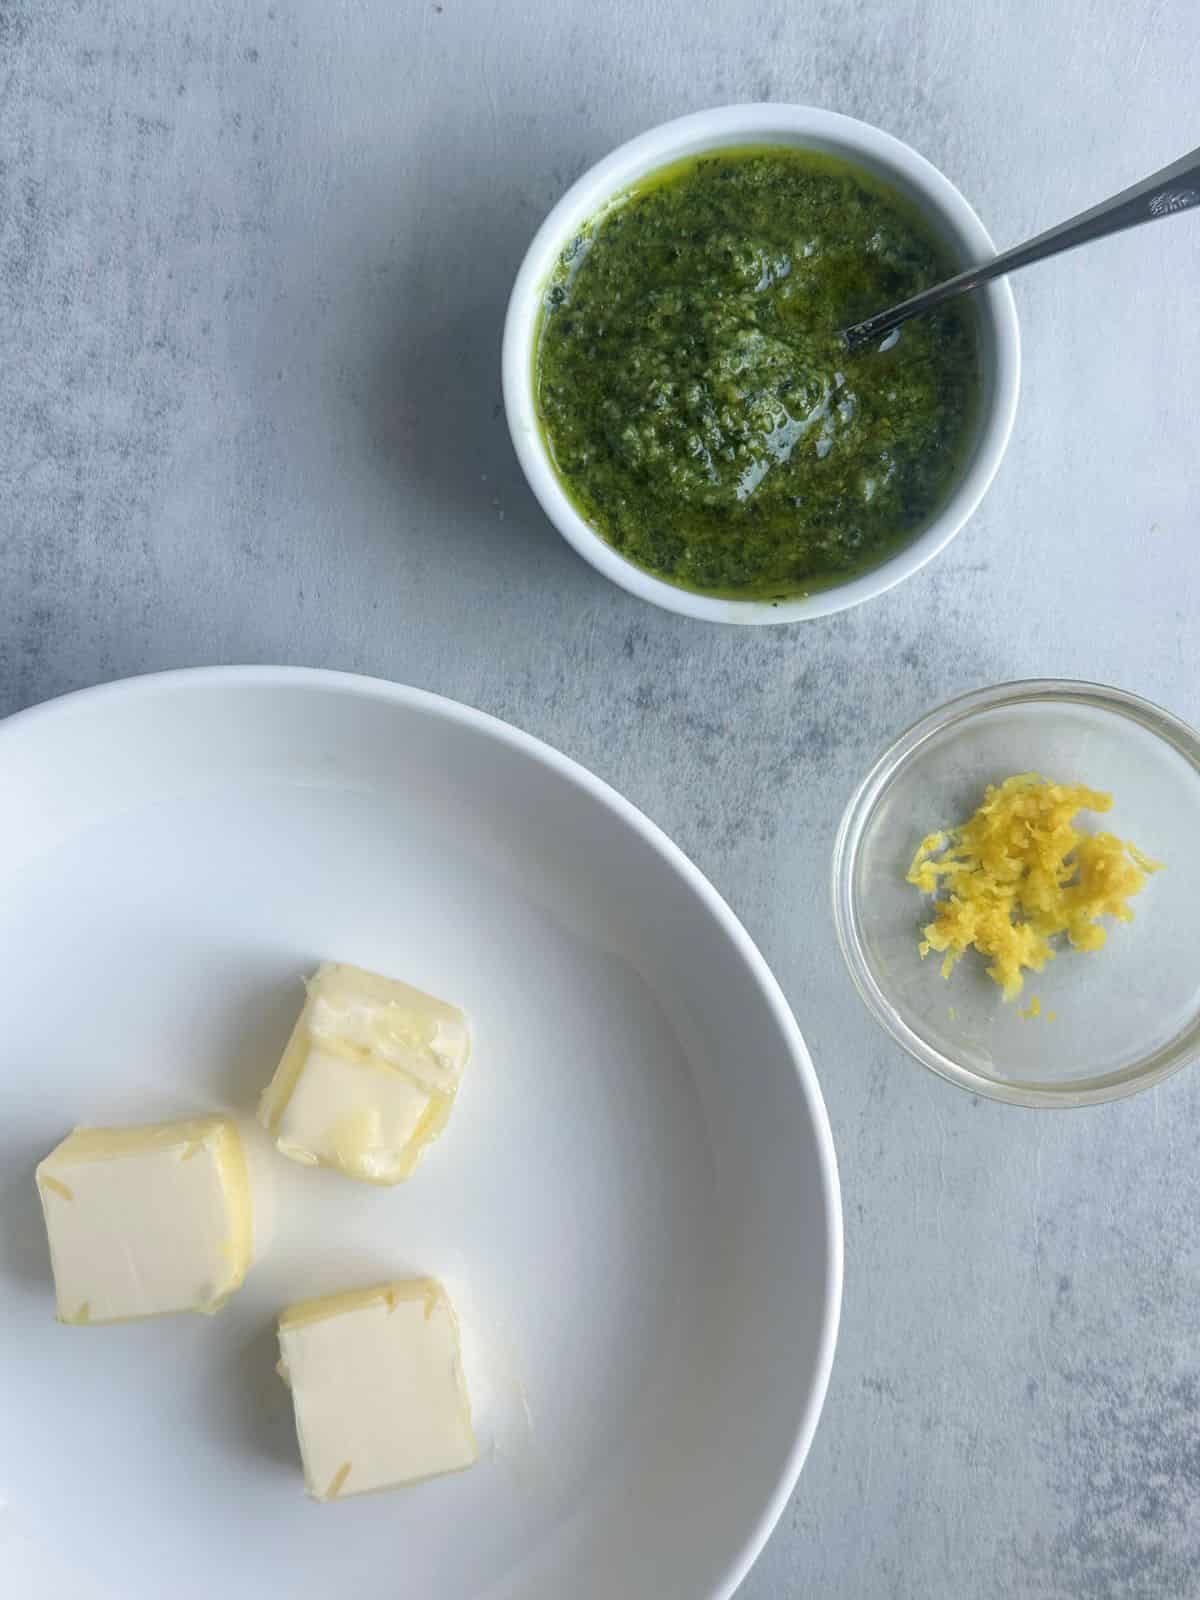 Slices of butter, pesto, and lemon zest in small bowls.